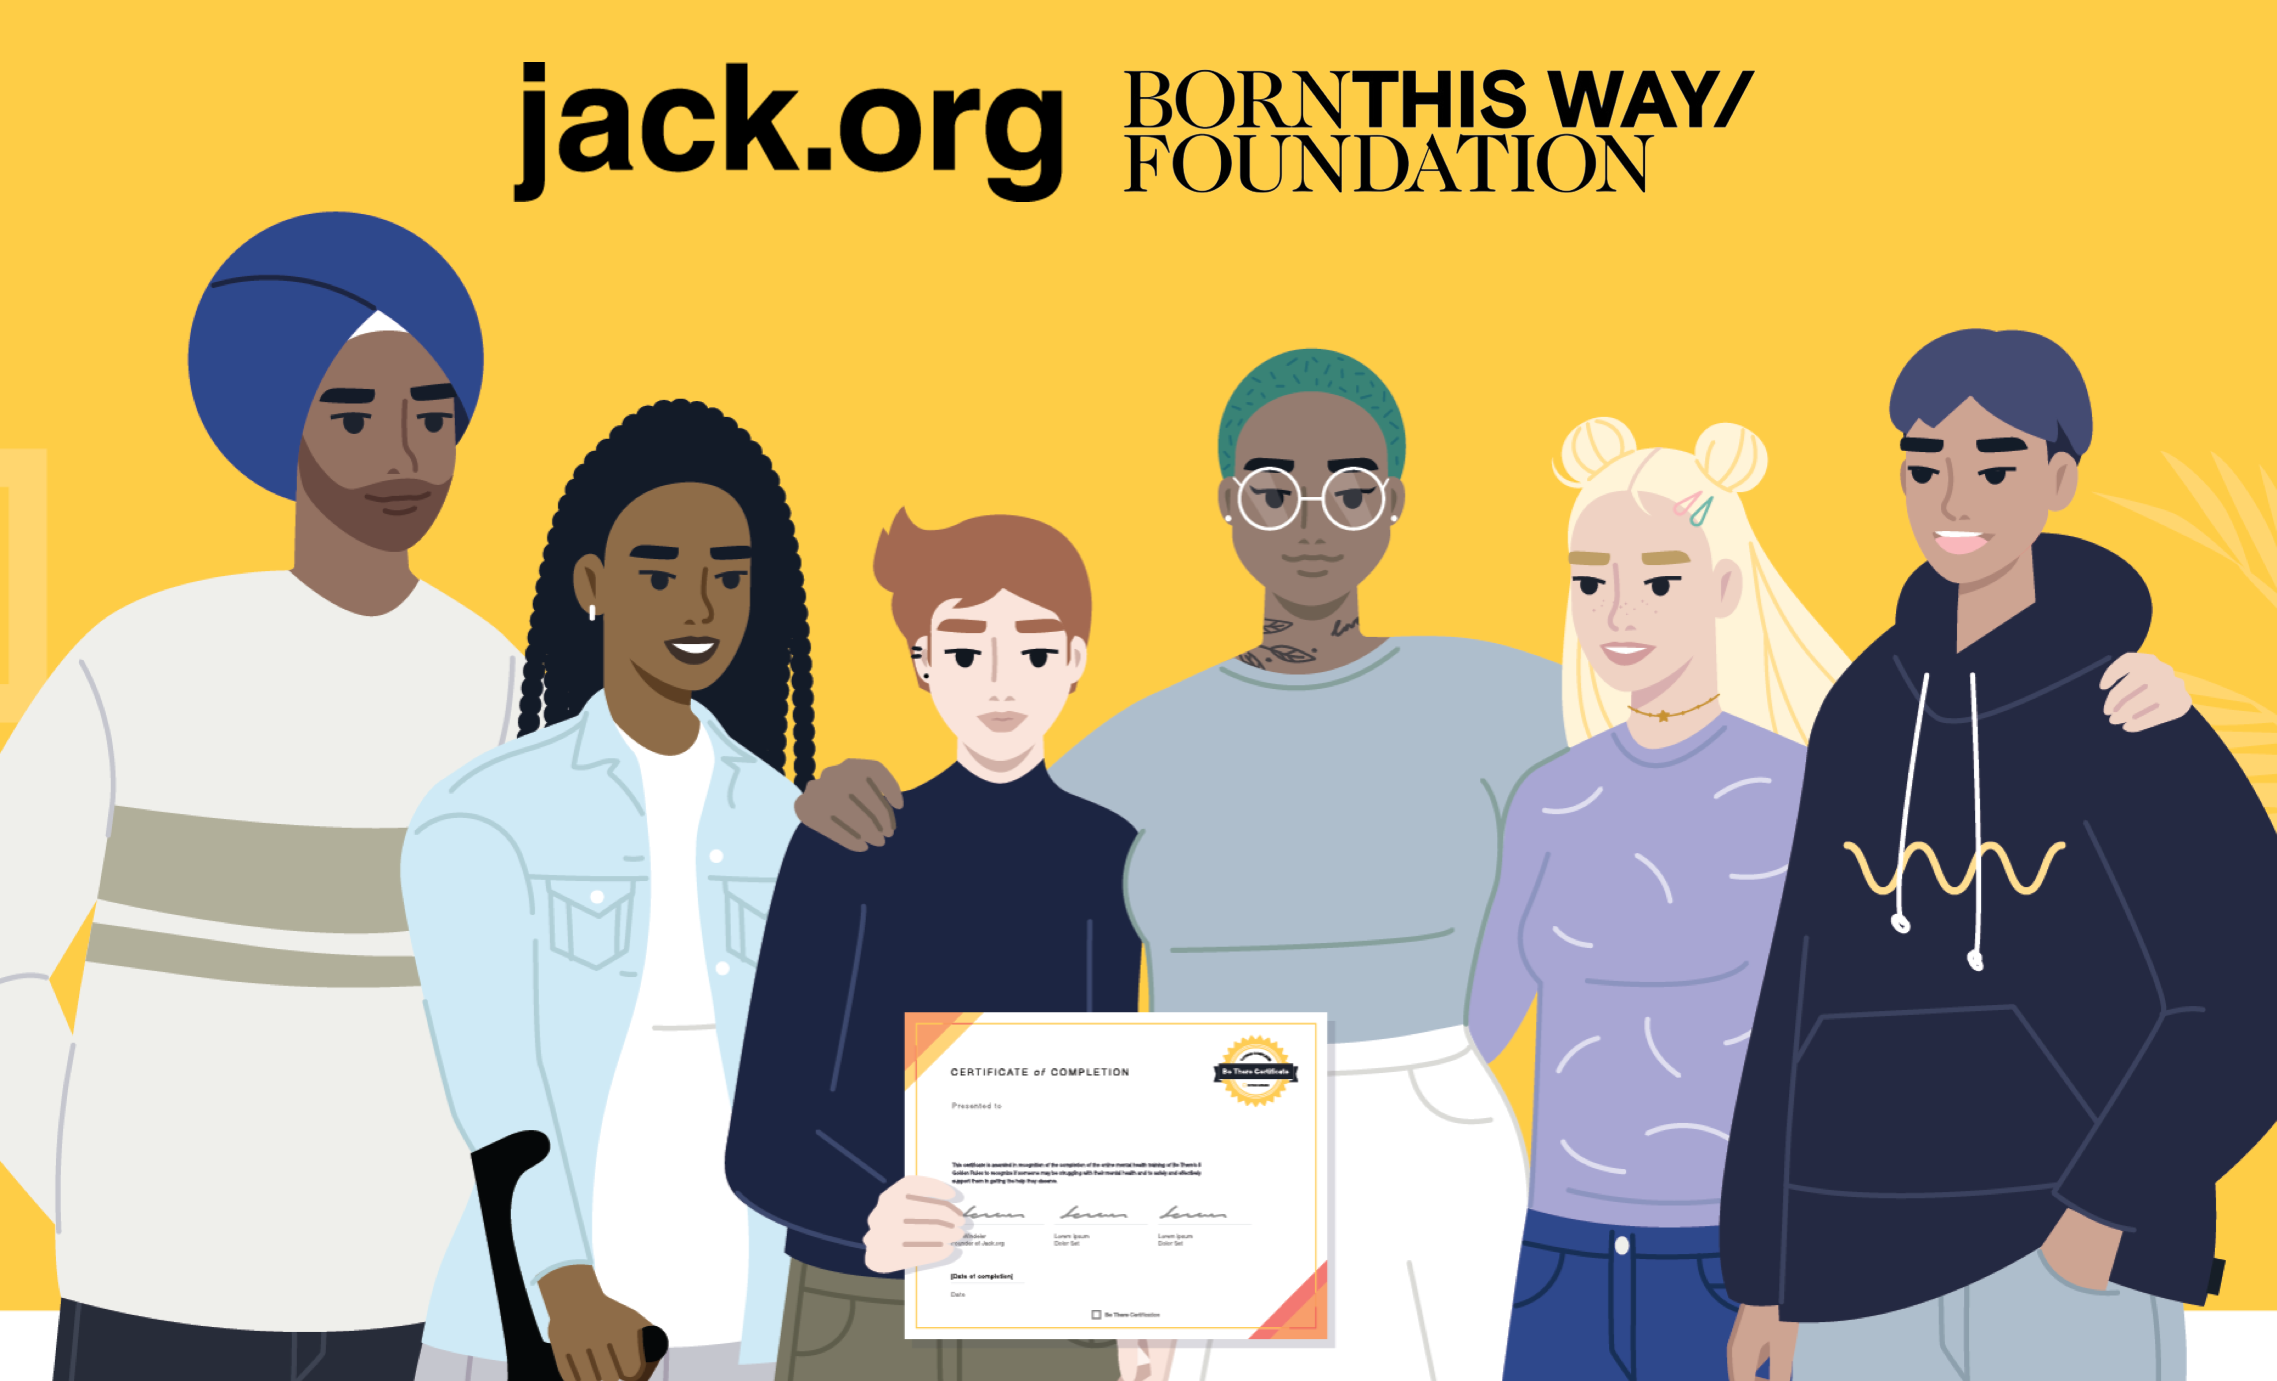 Young person holding a certificate surrounded by a group of cheerful young people of diverse race, ability, gender, body shape.